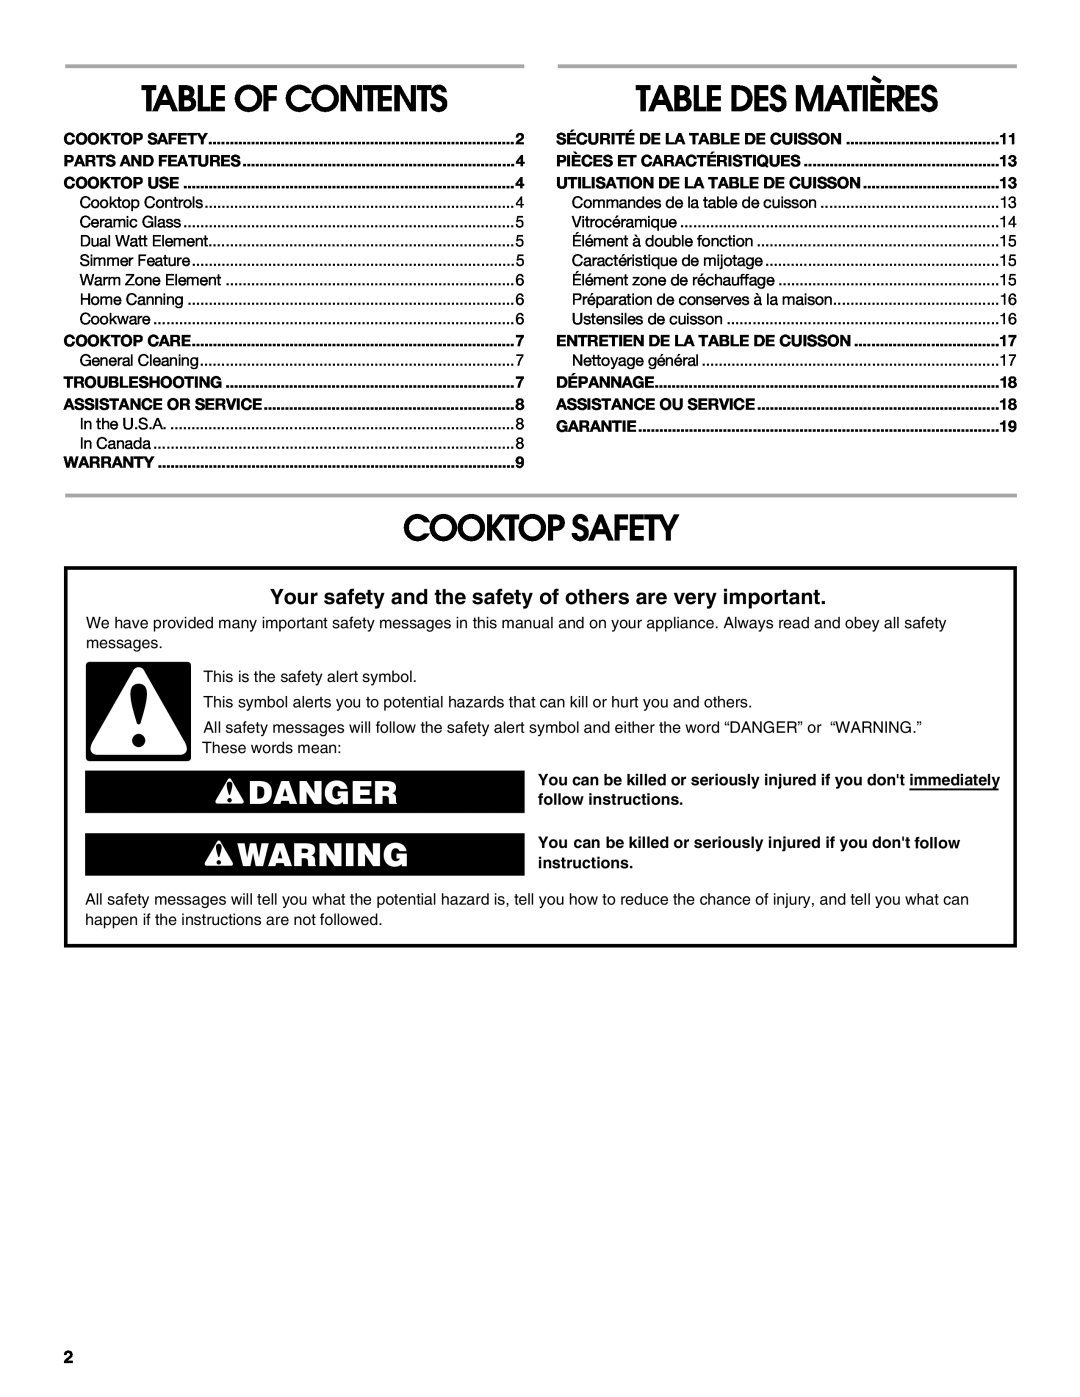 Whirlpool 8286619 manual Table Of Contents, Table Des Matières, Cooktop Safety, Danger 